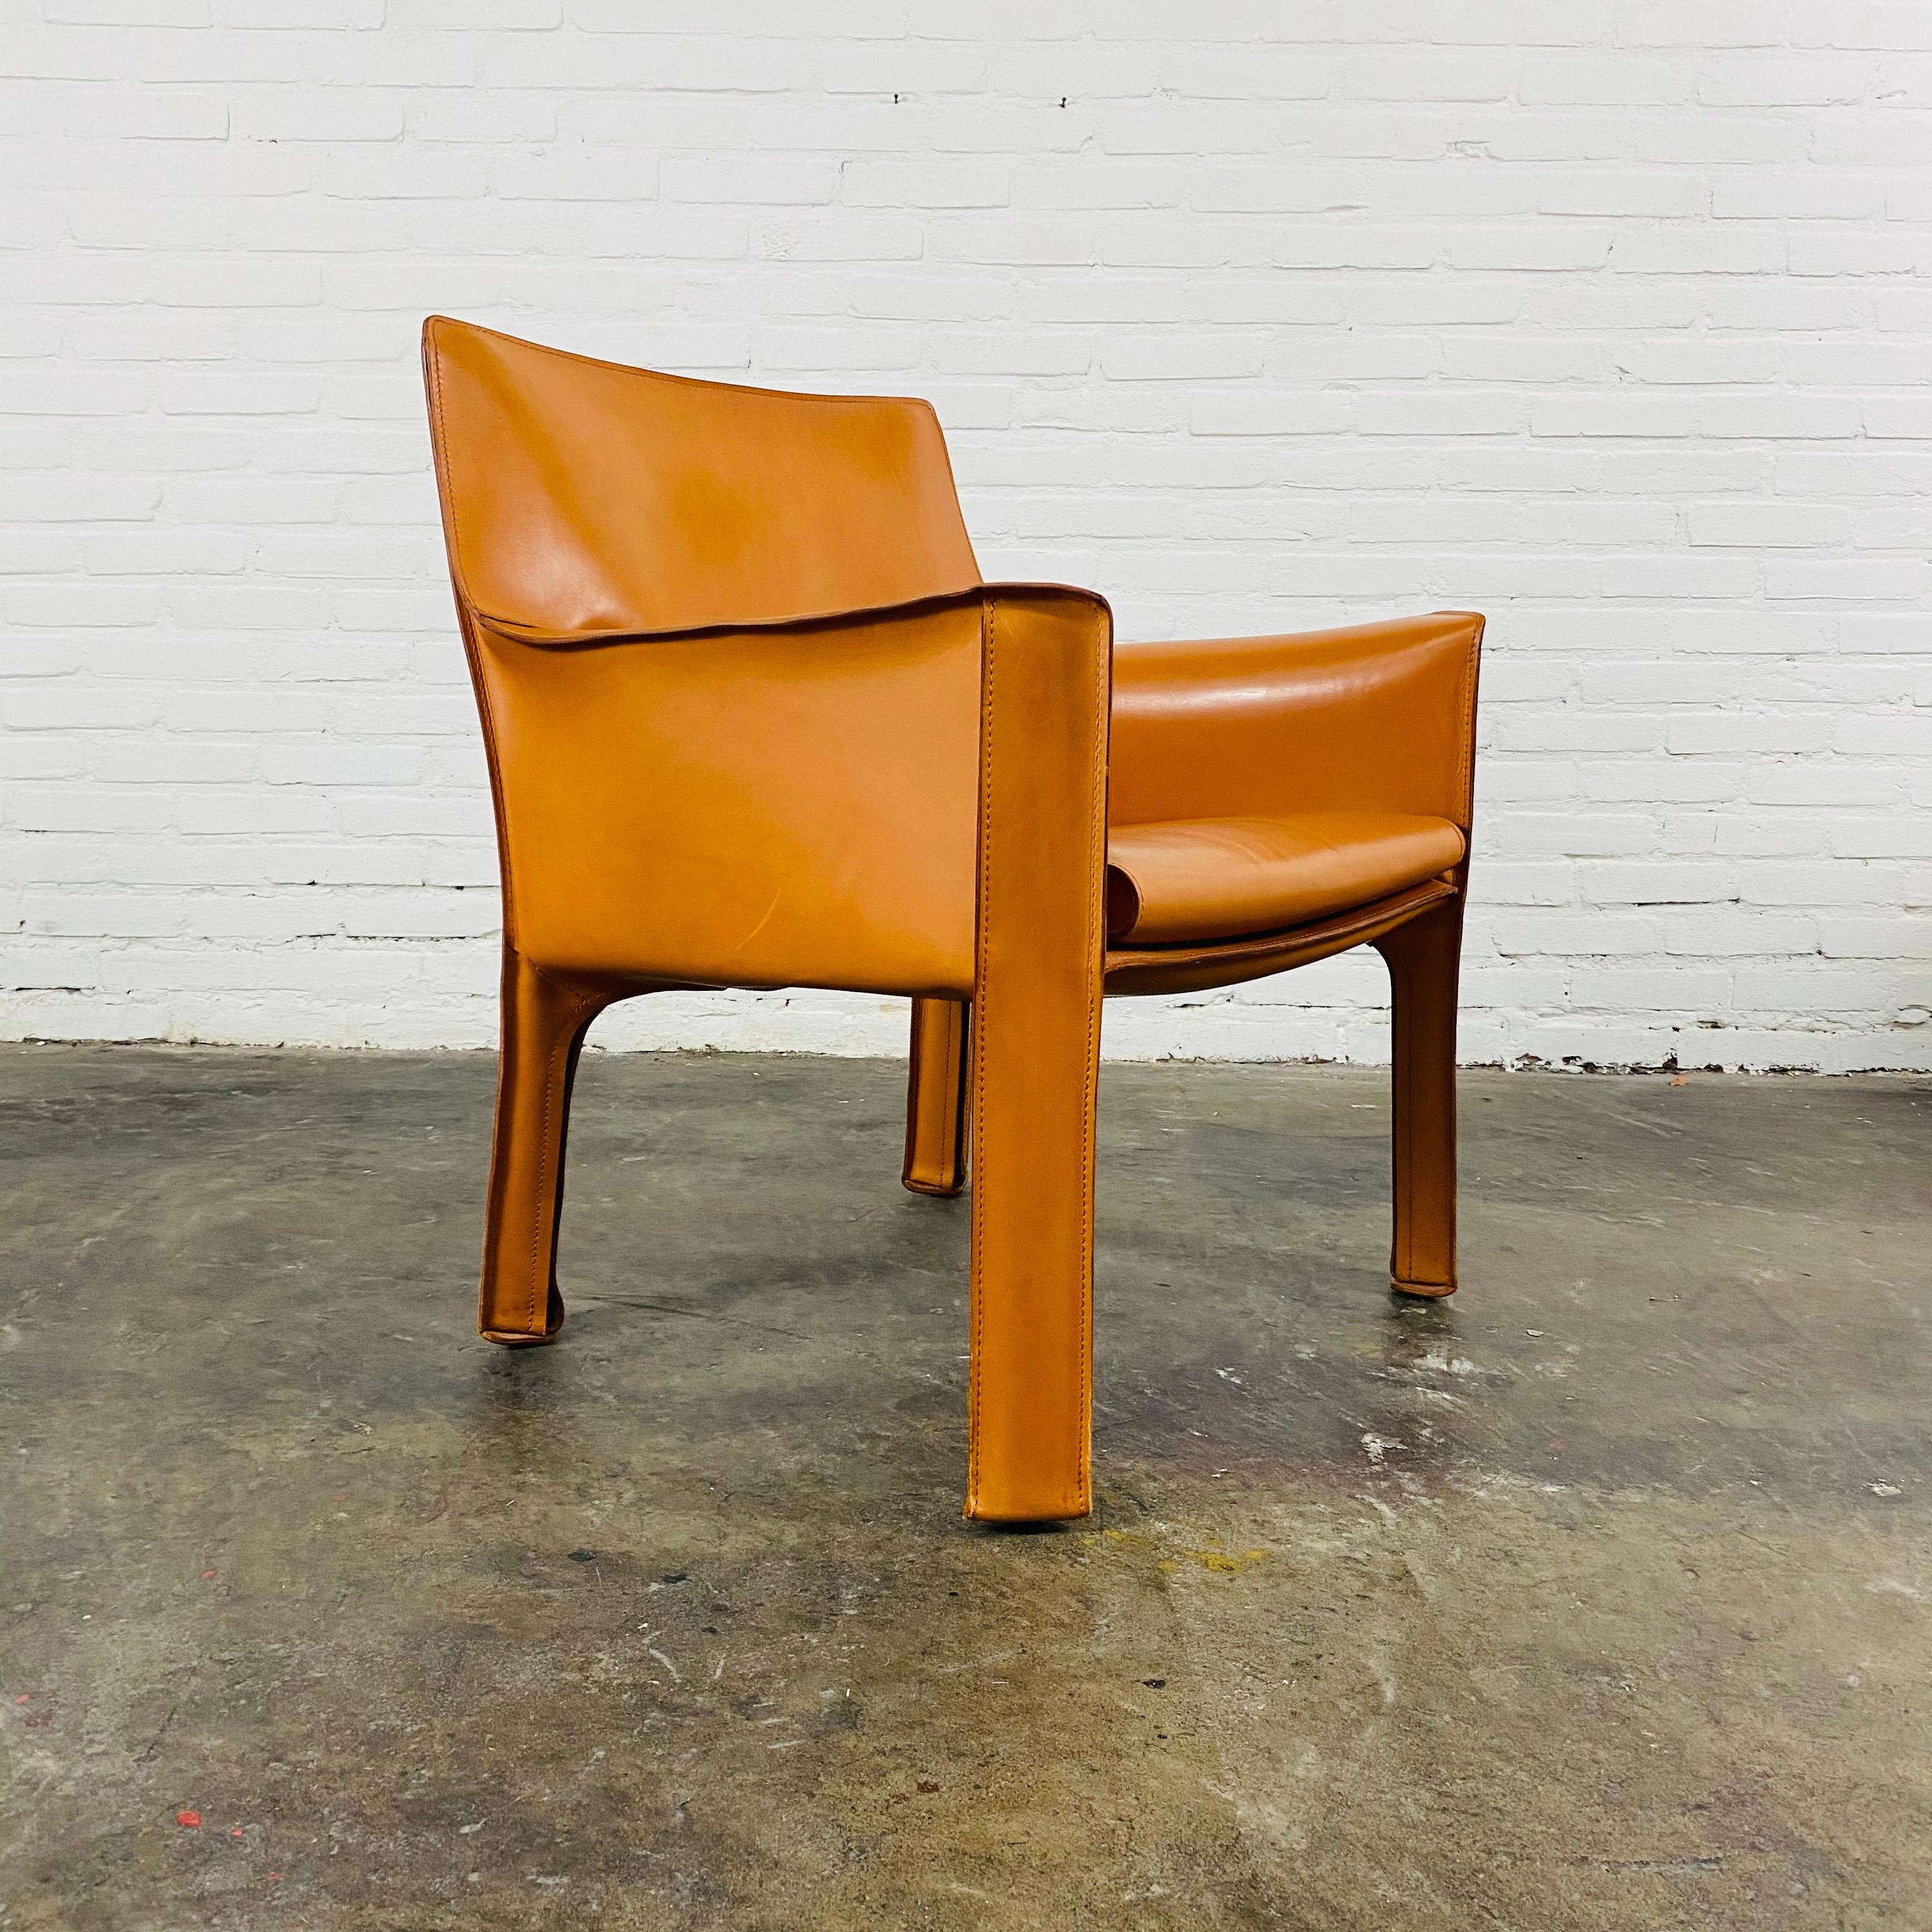 Steel Vintage Italian Cab 414 Cognac Leather Chair by Mario Bellini for Cassina, 1970 